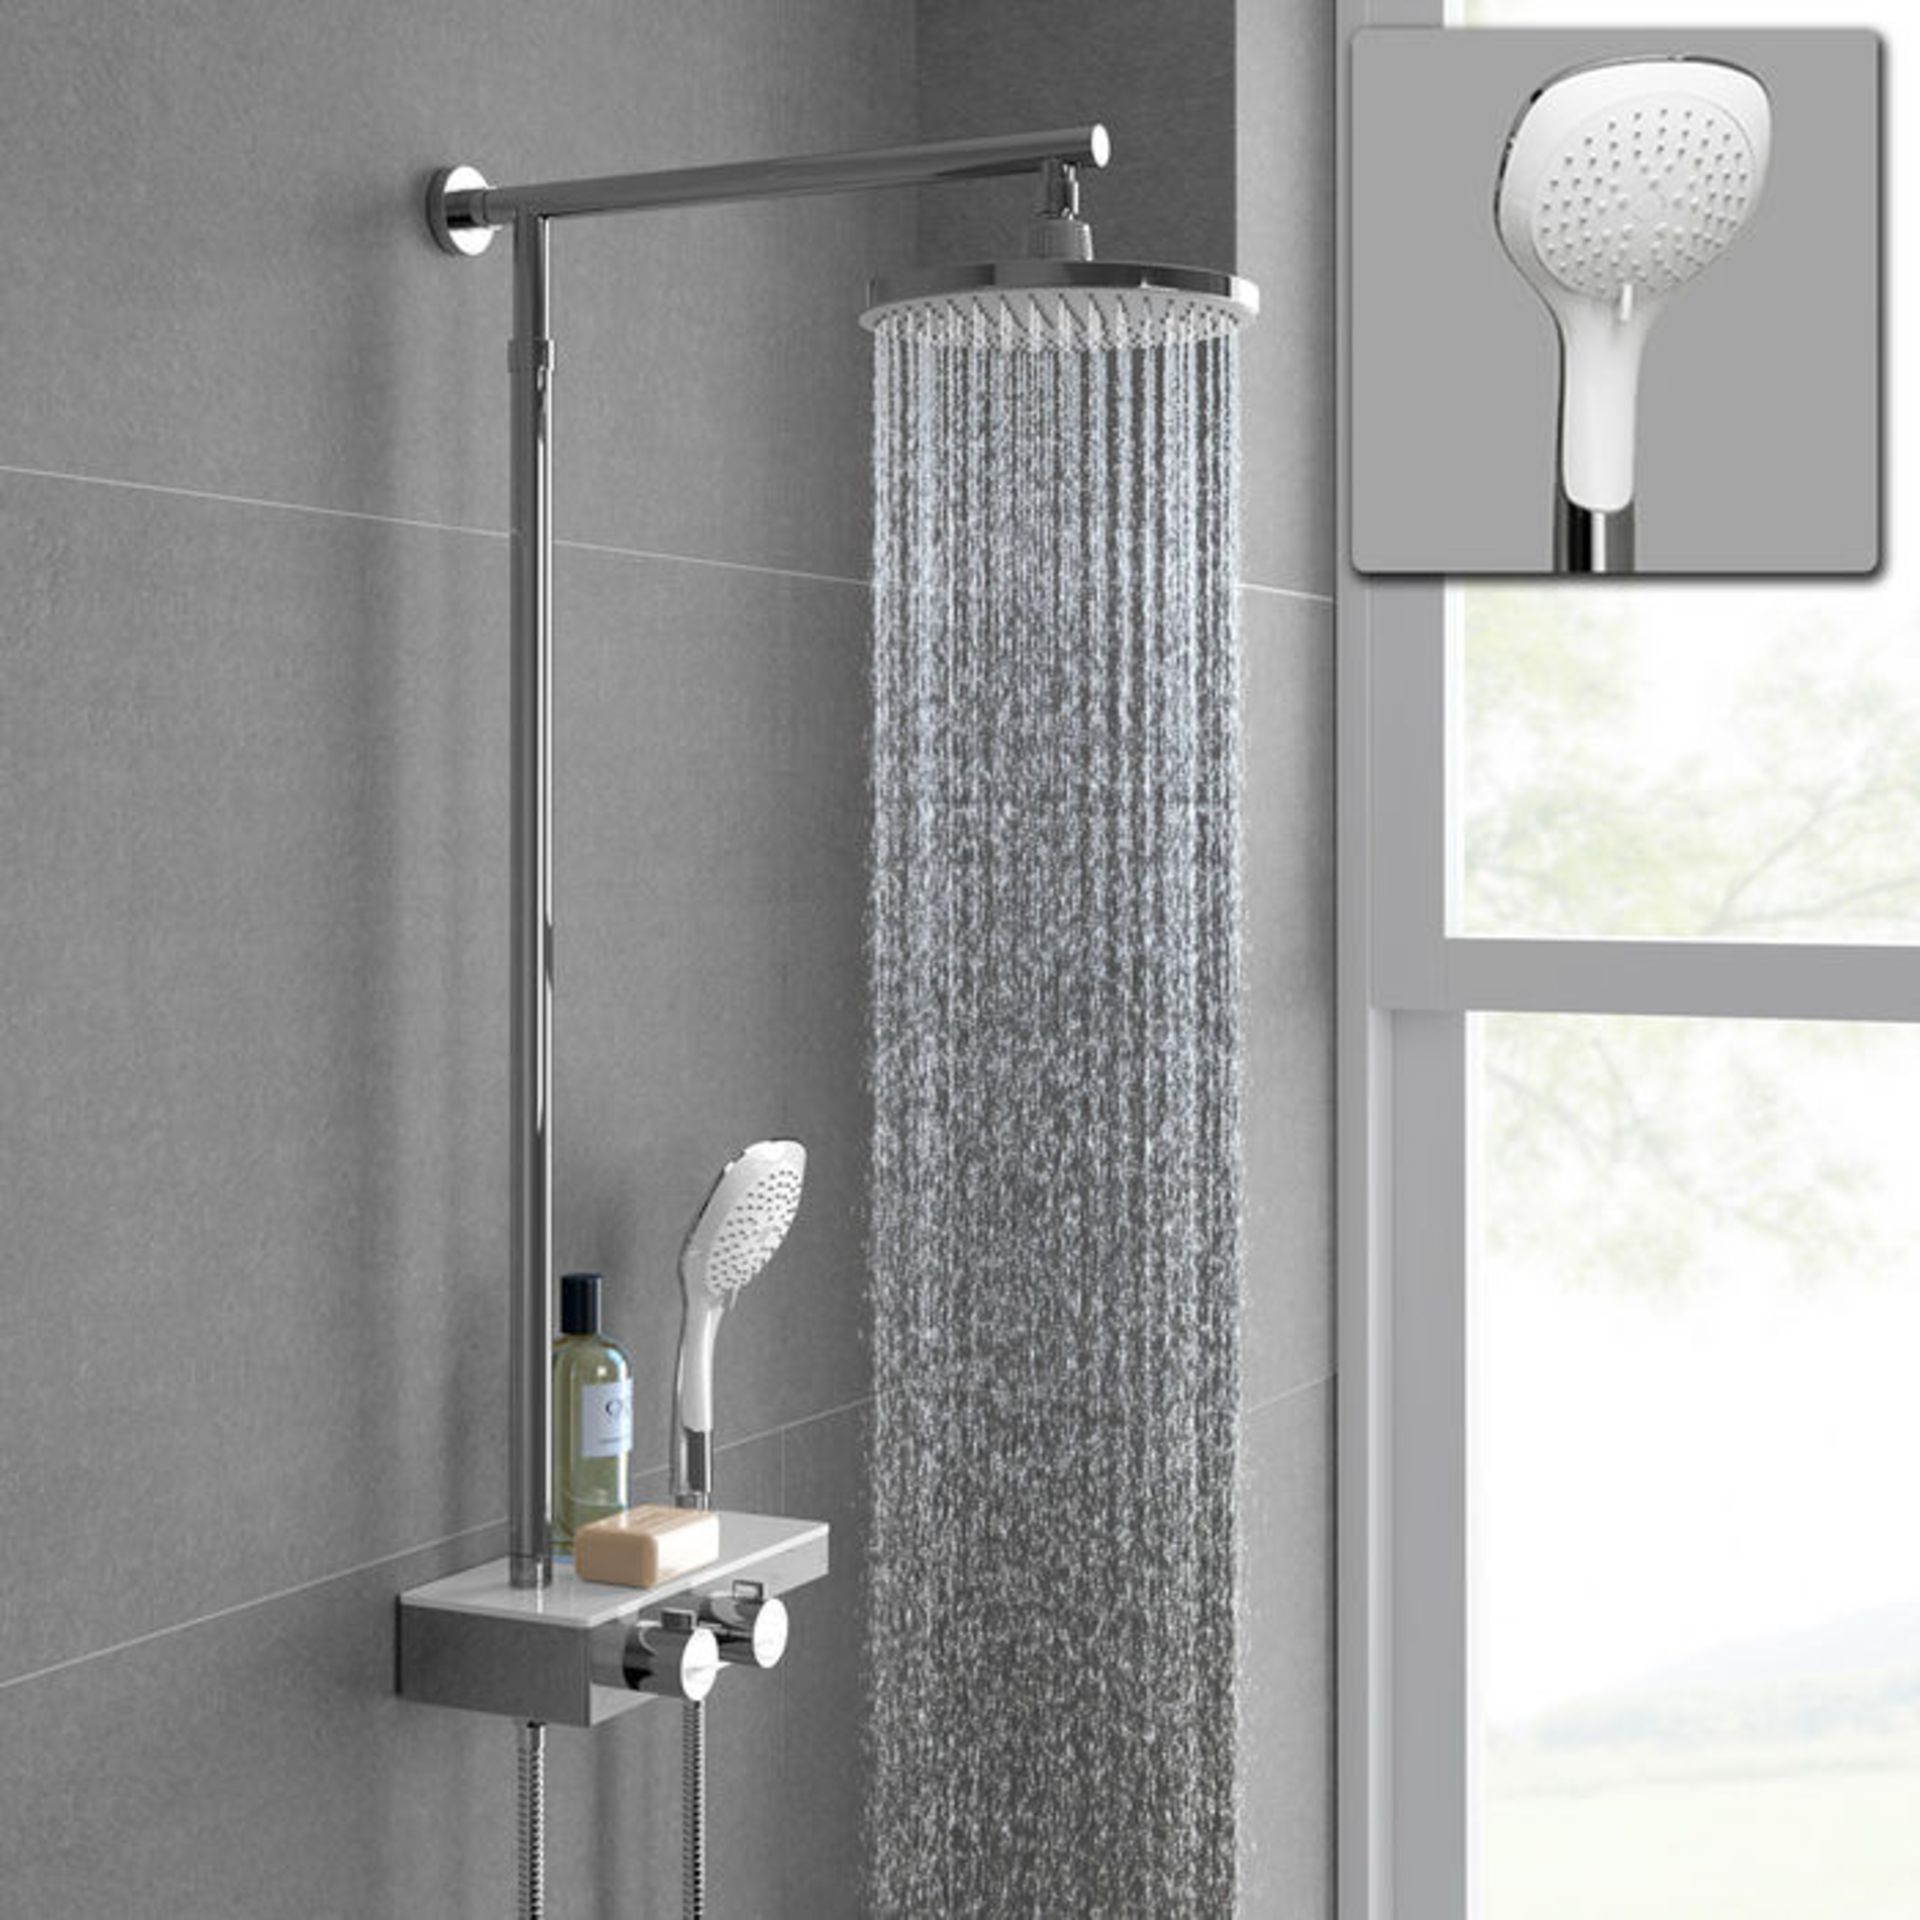 (OS122) Round Exposed Thermostatic Mixer Shower Kit Medium Head & Shelf. RRP £349.99. Cool to - Image 3 of 4